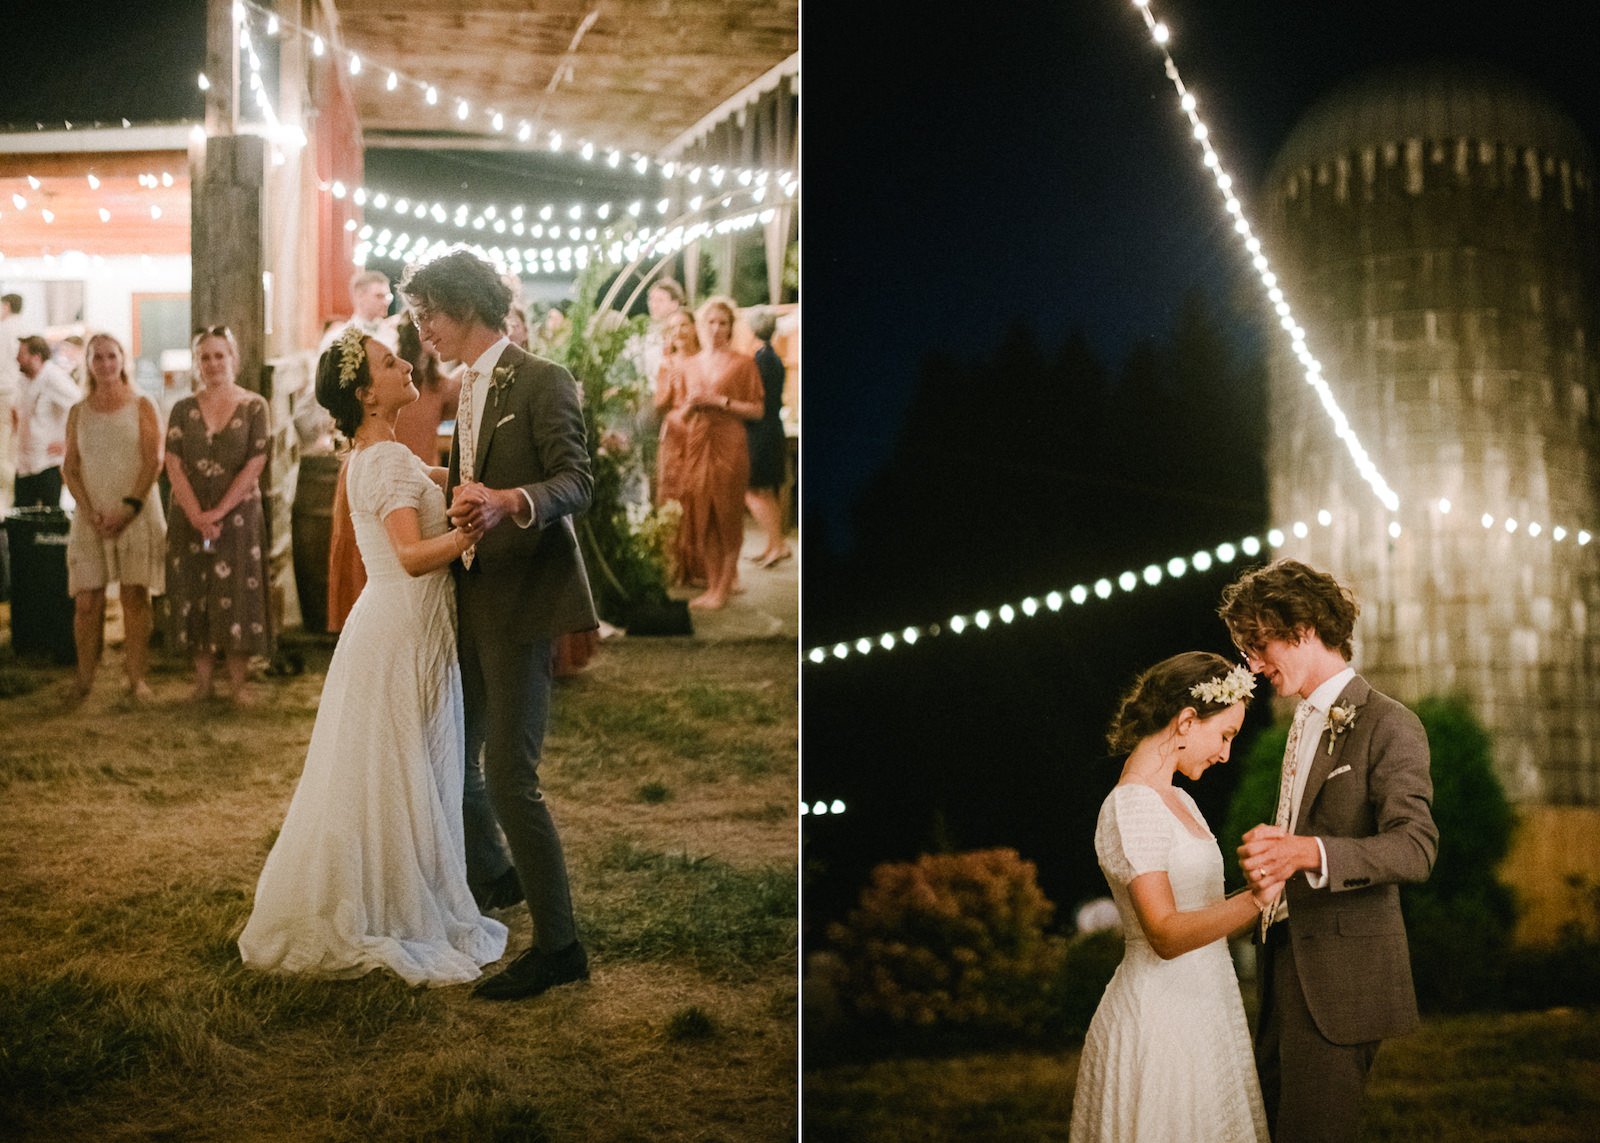  Couple shares romantic dance by silo and twinkle lights 